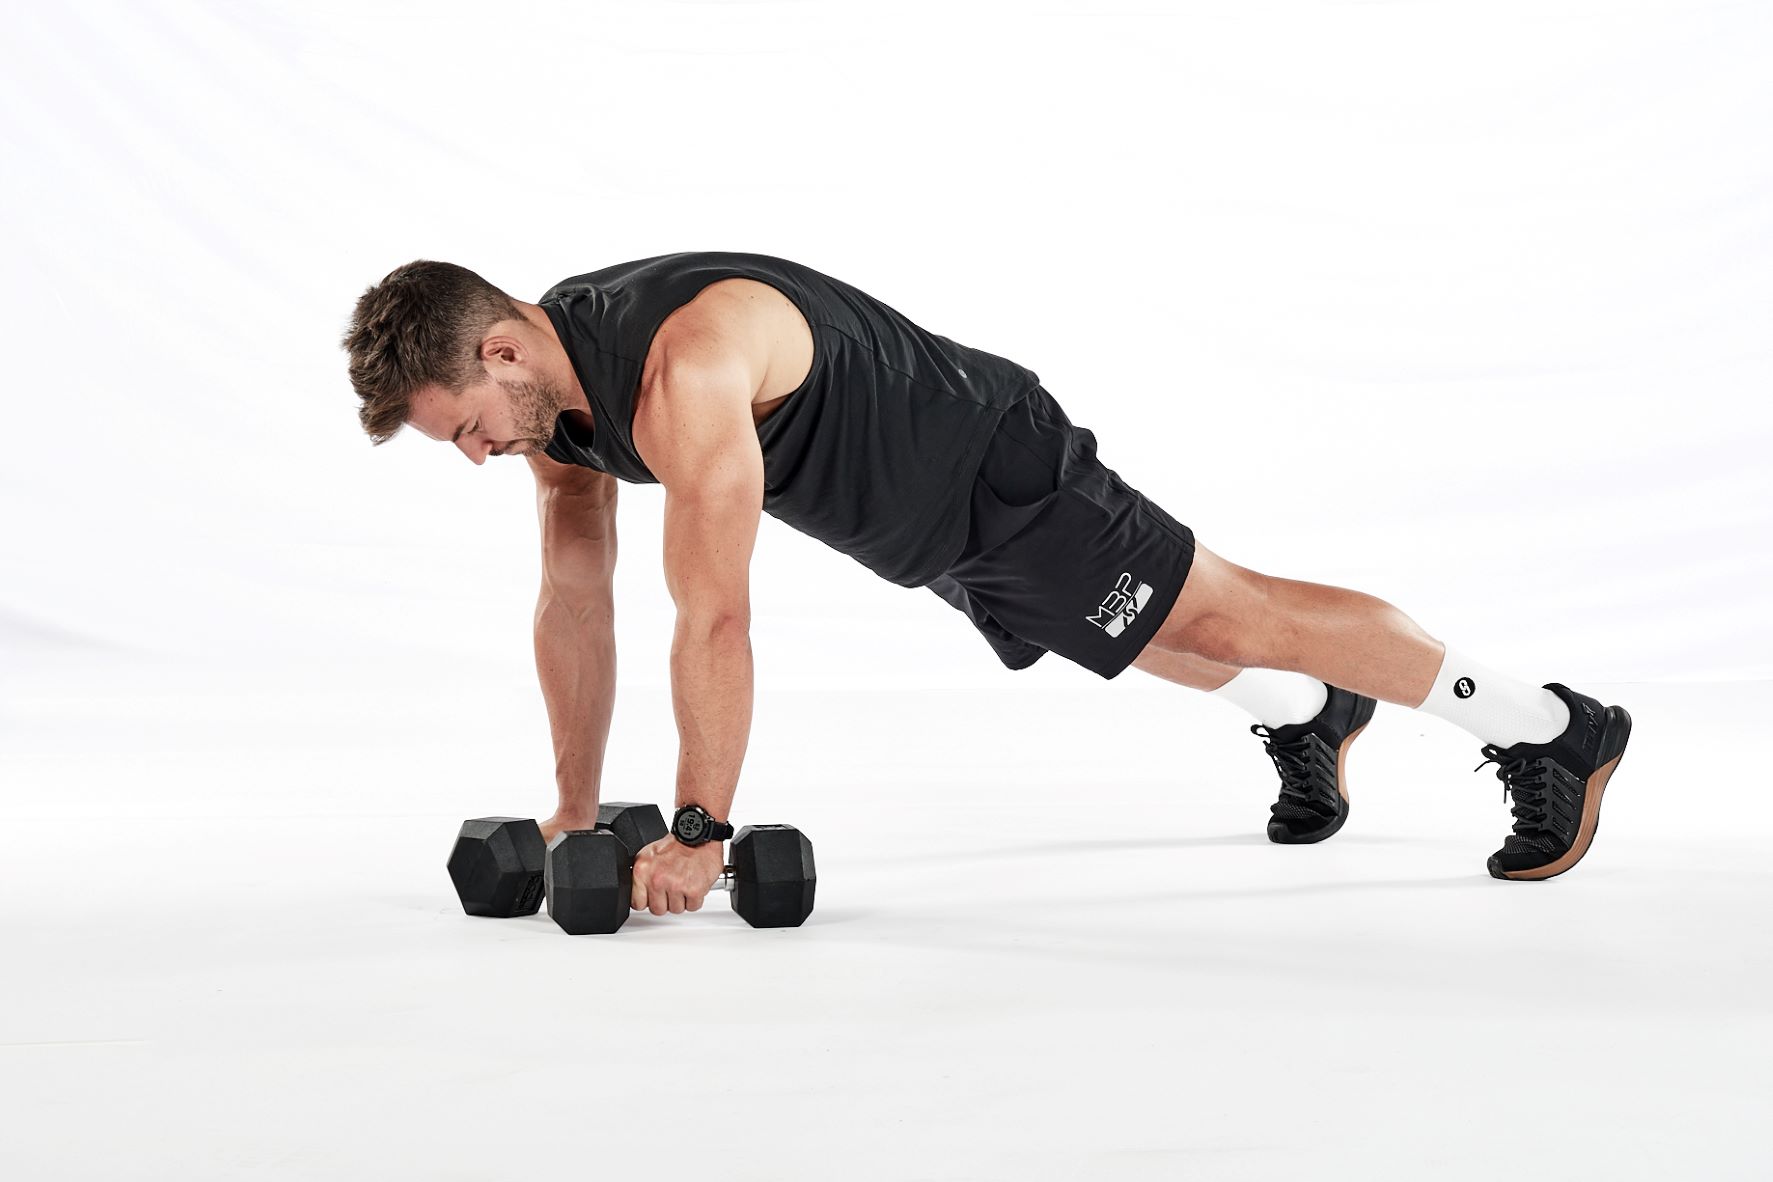 Three stages of the dumbbell renegade row – in a press-up position, holding a dumbbell in each hand; rowing up towards the hip with one hand; rowing up towards the hip with the other.